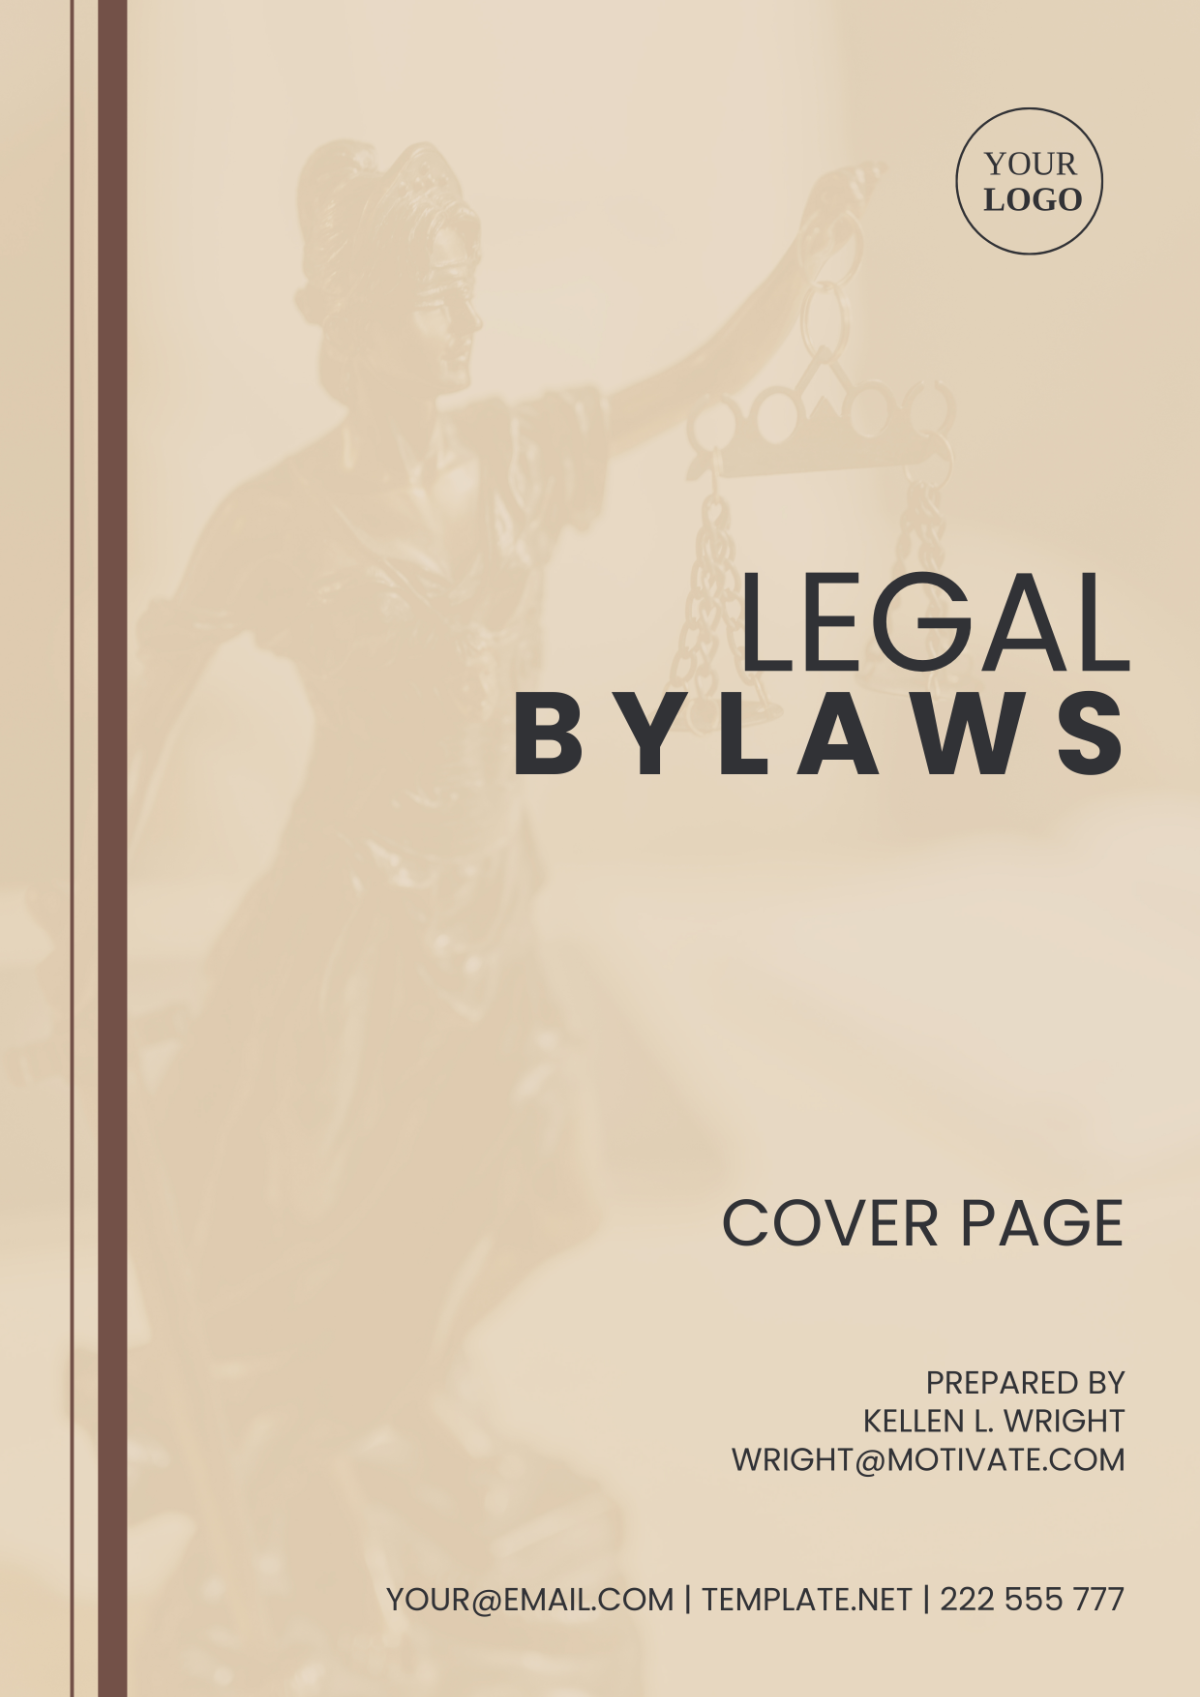 Legal Bylaws Cover Page